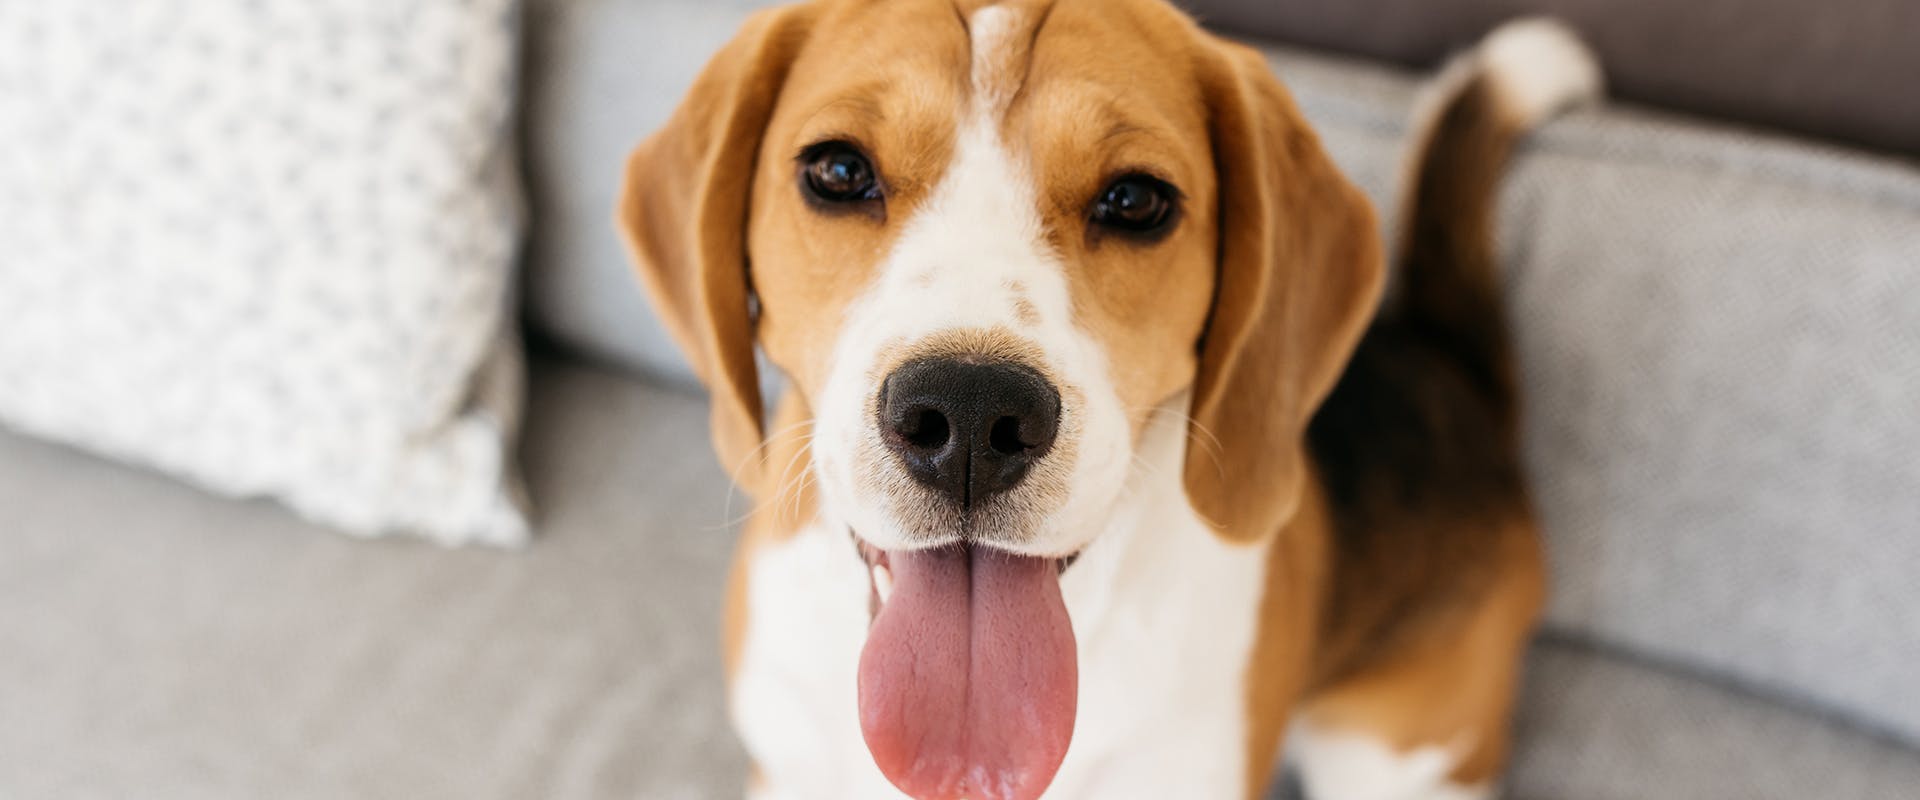 A Beagle dog sitting on a sofa with its tongue sticking out